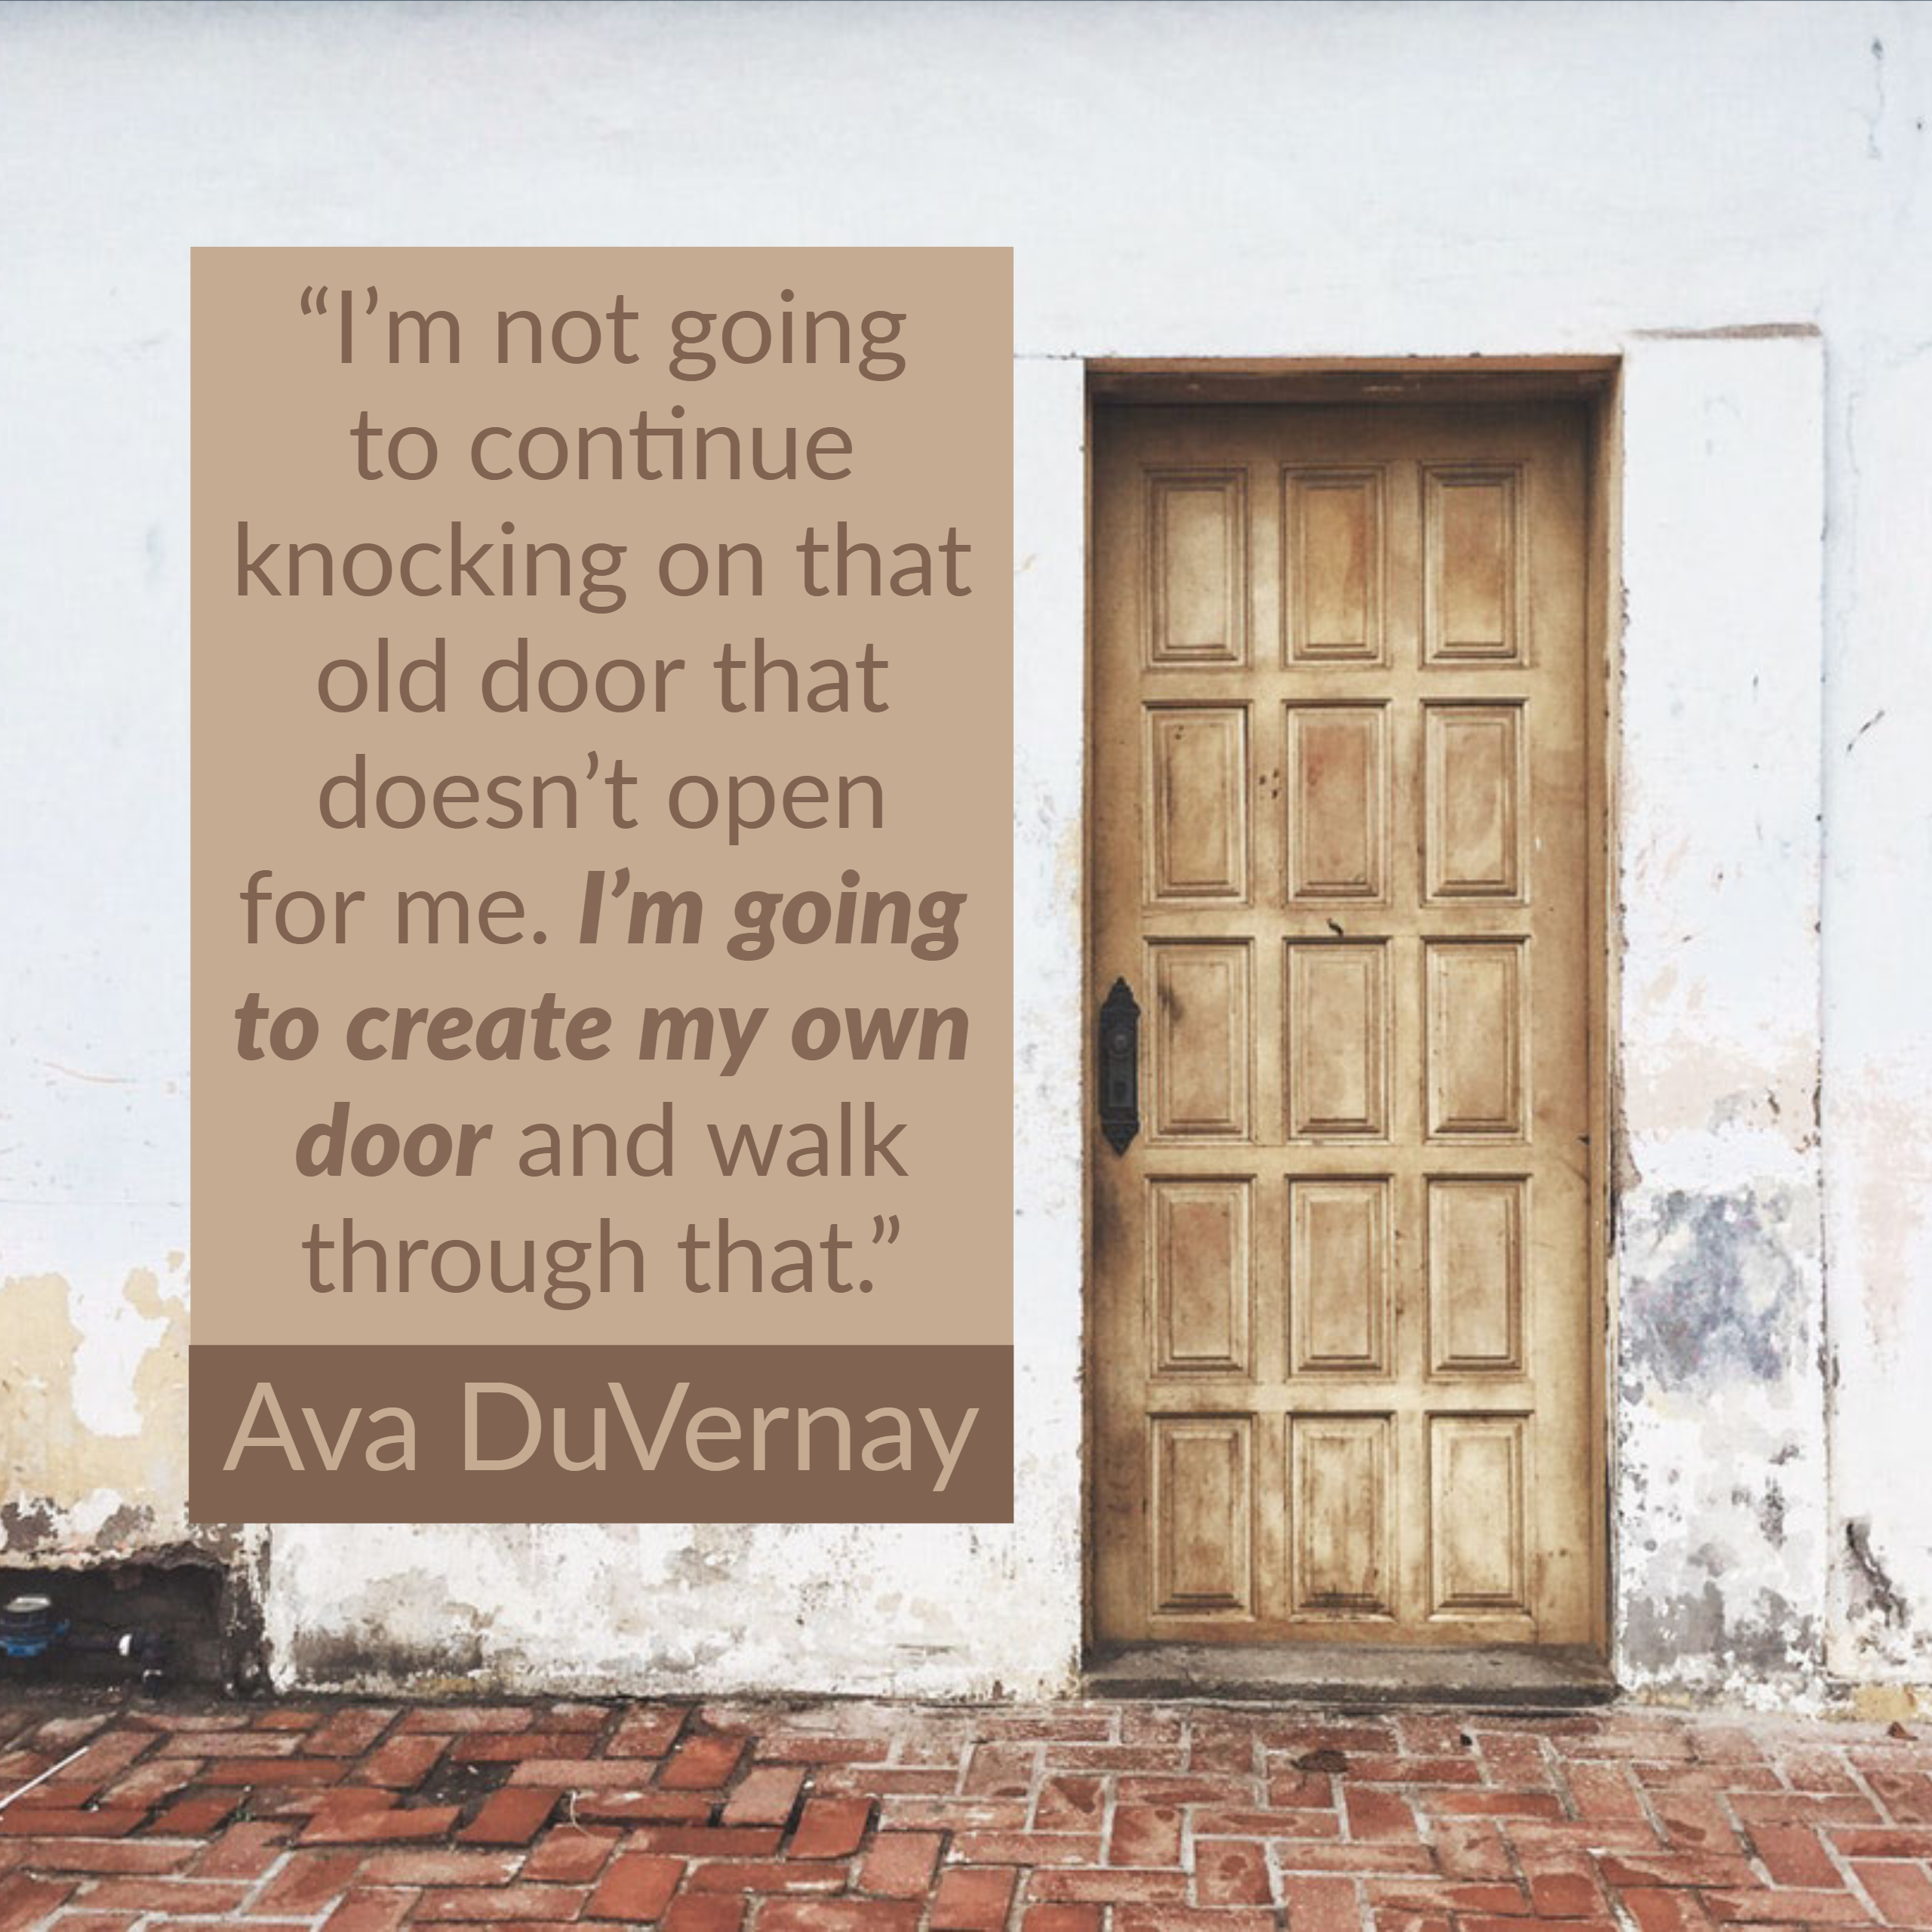 I'm not going to continue knocking on that old door that doesn't open for me. I'm going to create my own door and walk through that.